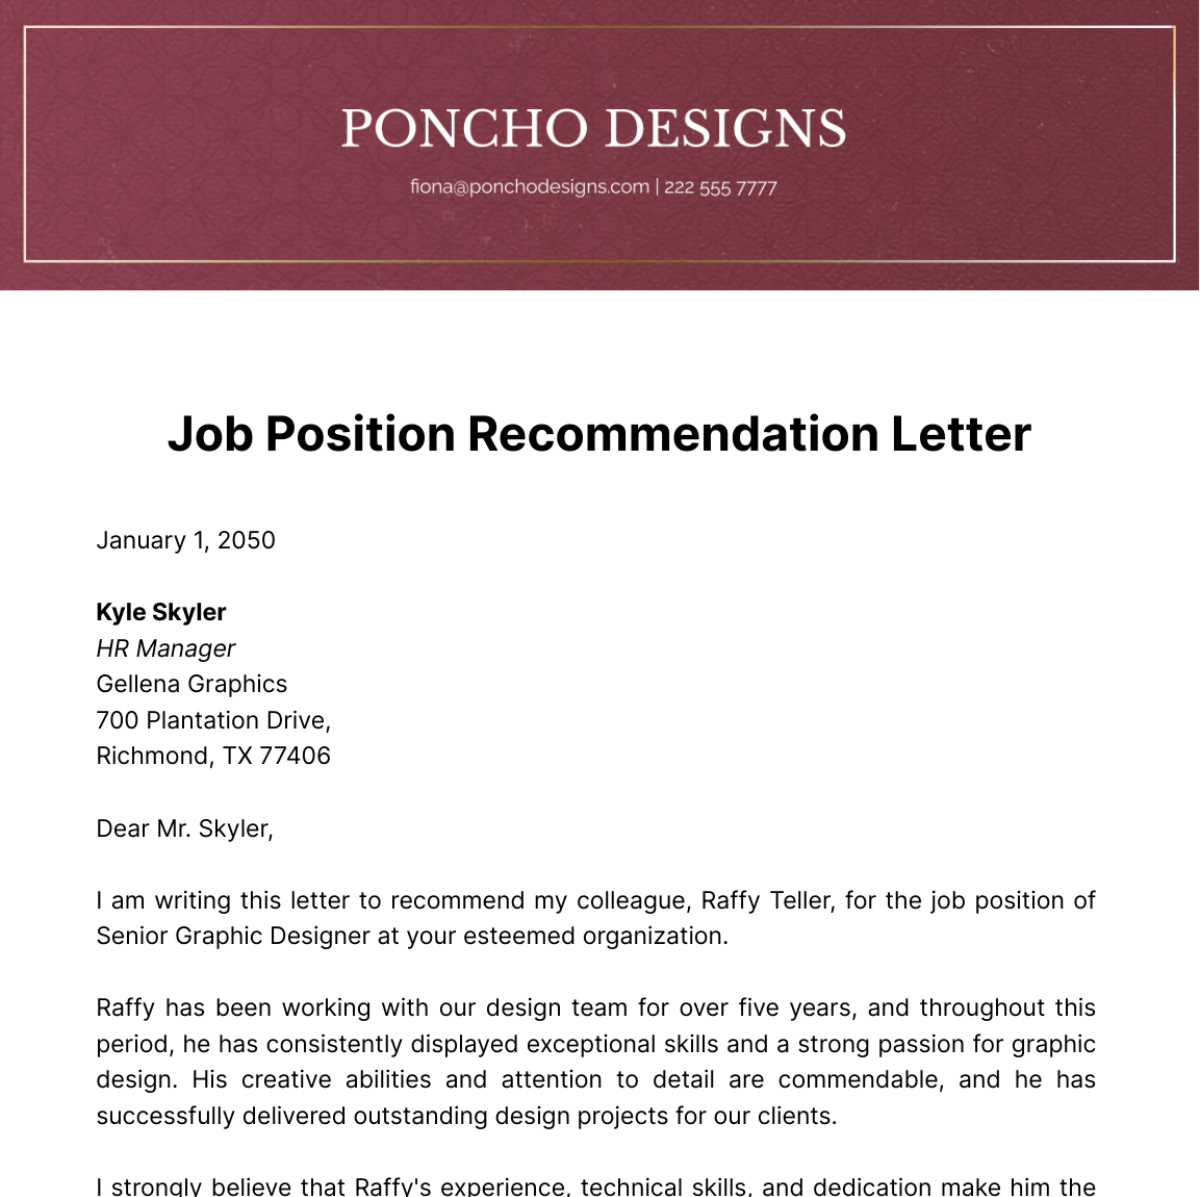 Free Job Position Recommendation Letter   Template